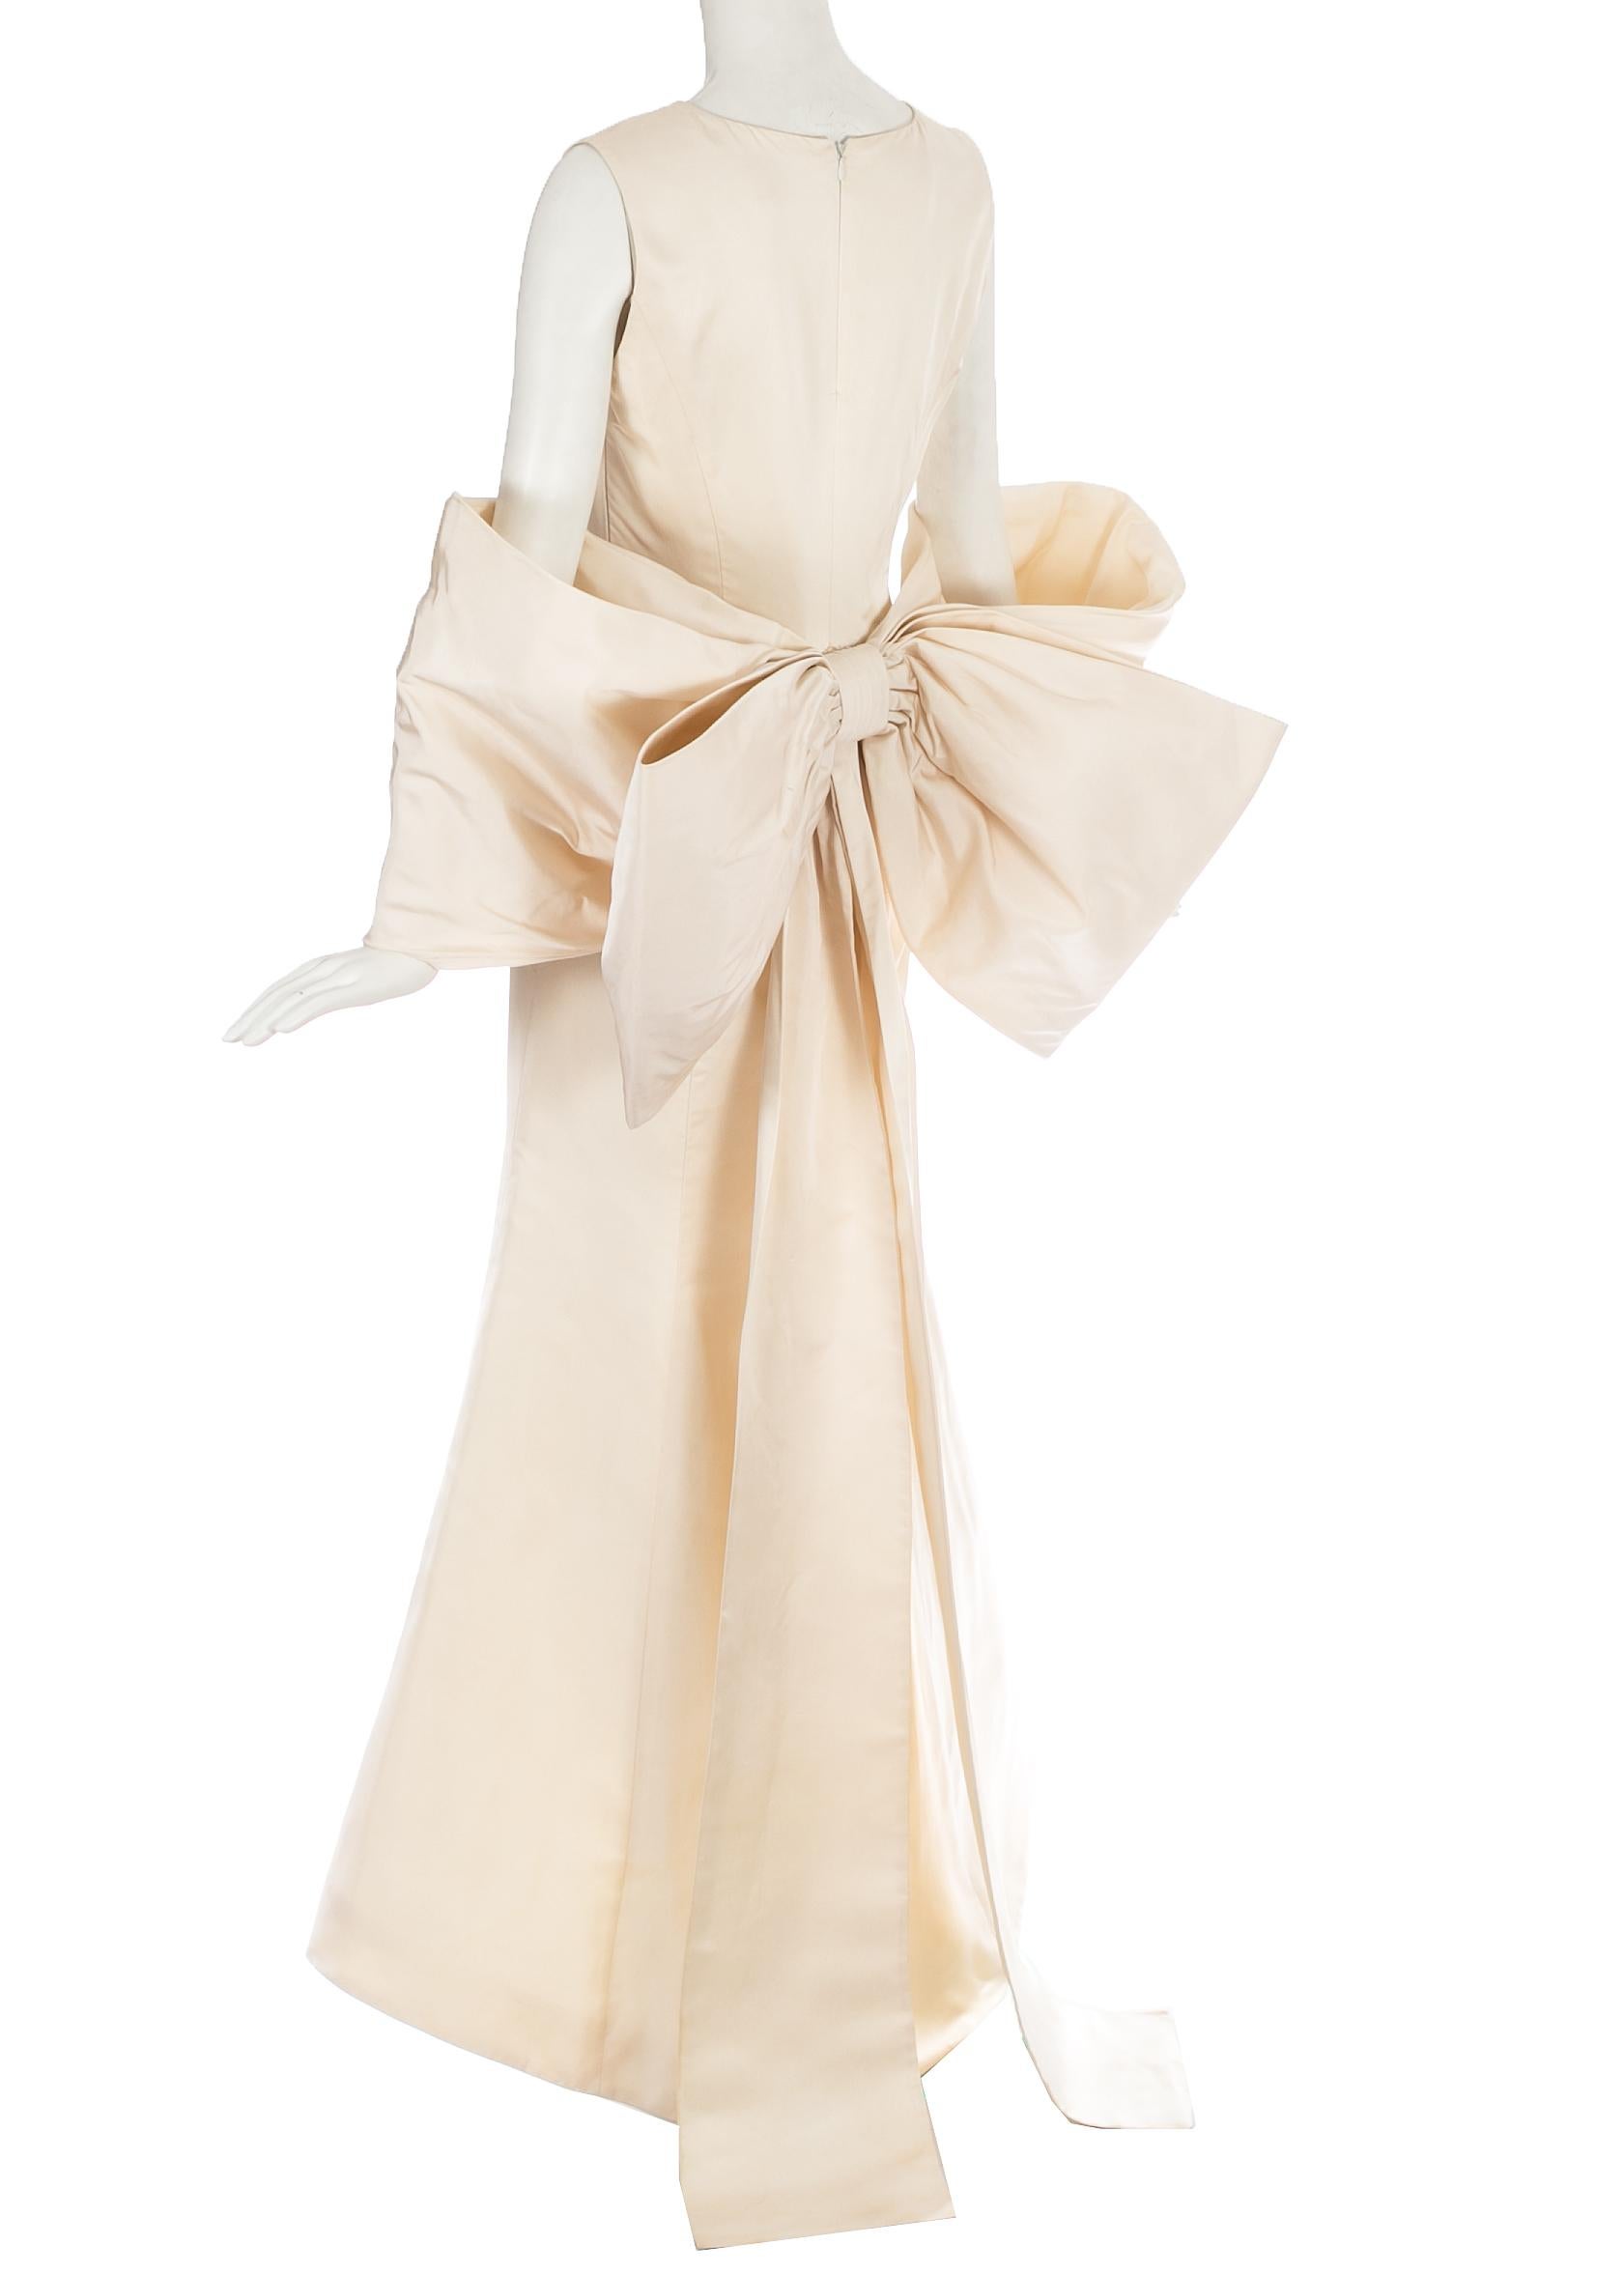 Dolce & Gabbana ivory silk fishtail wedding dress with large bow, c. 1990s In Good Condition For Sale In London, GB